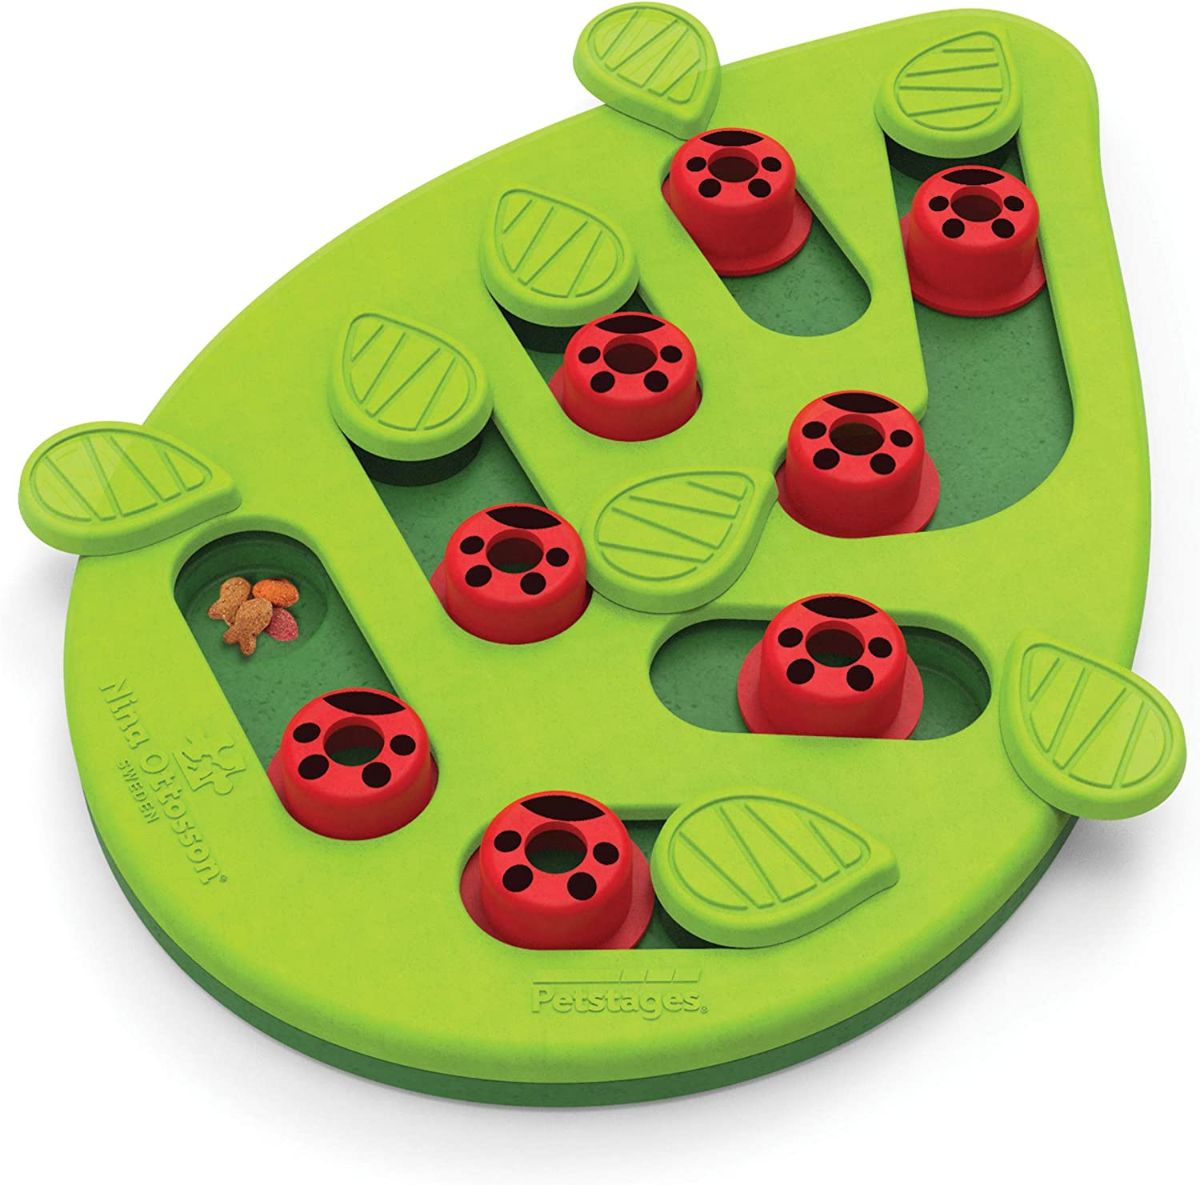 Petstages Puzzle Toy